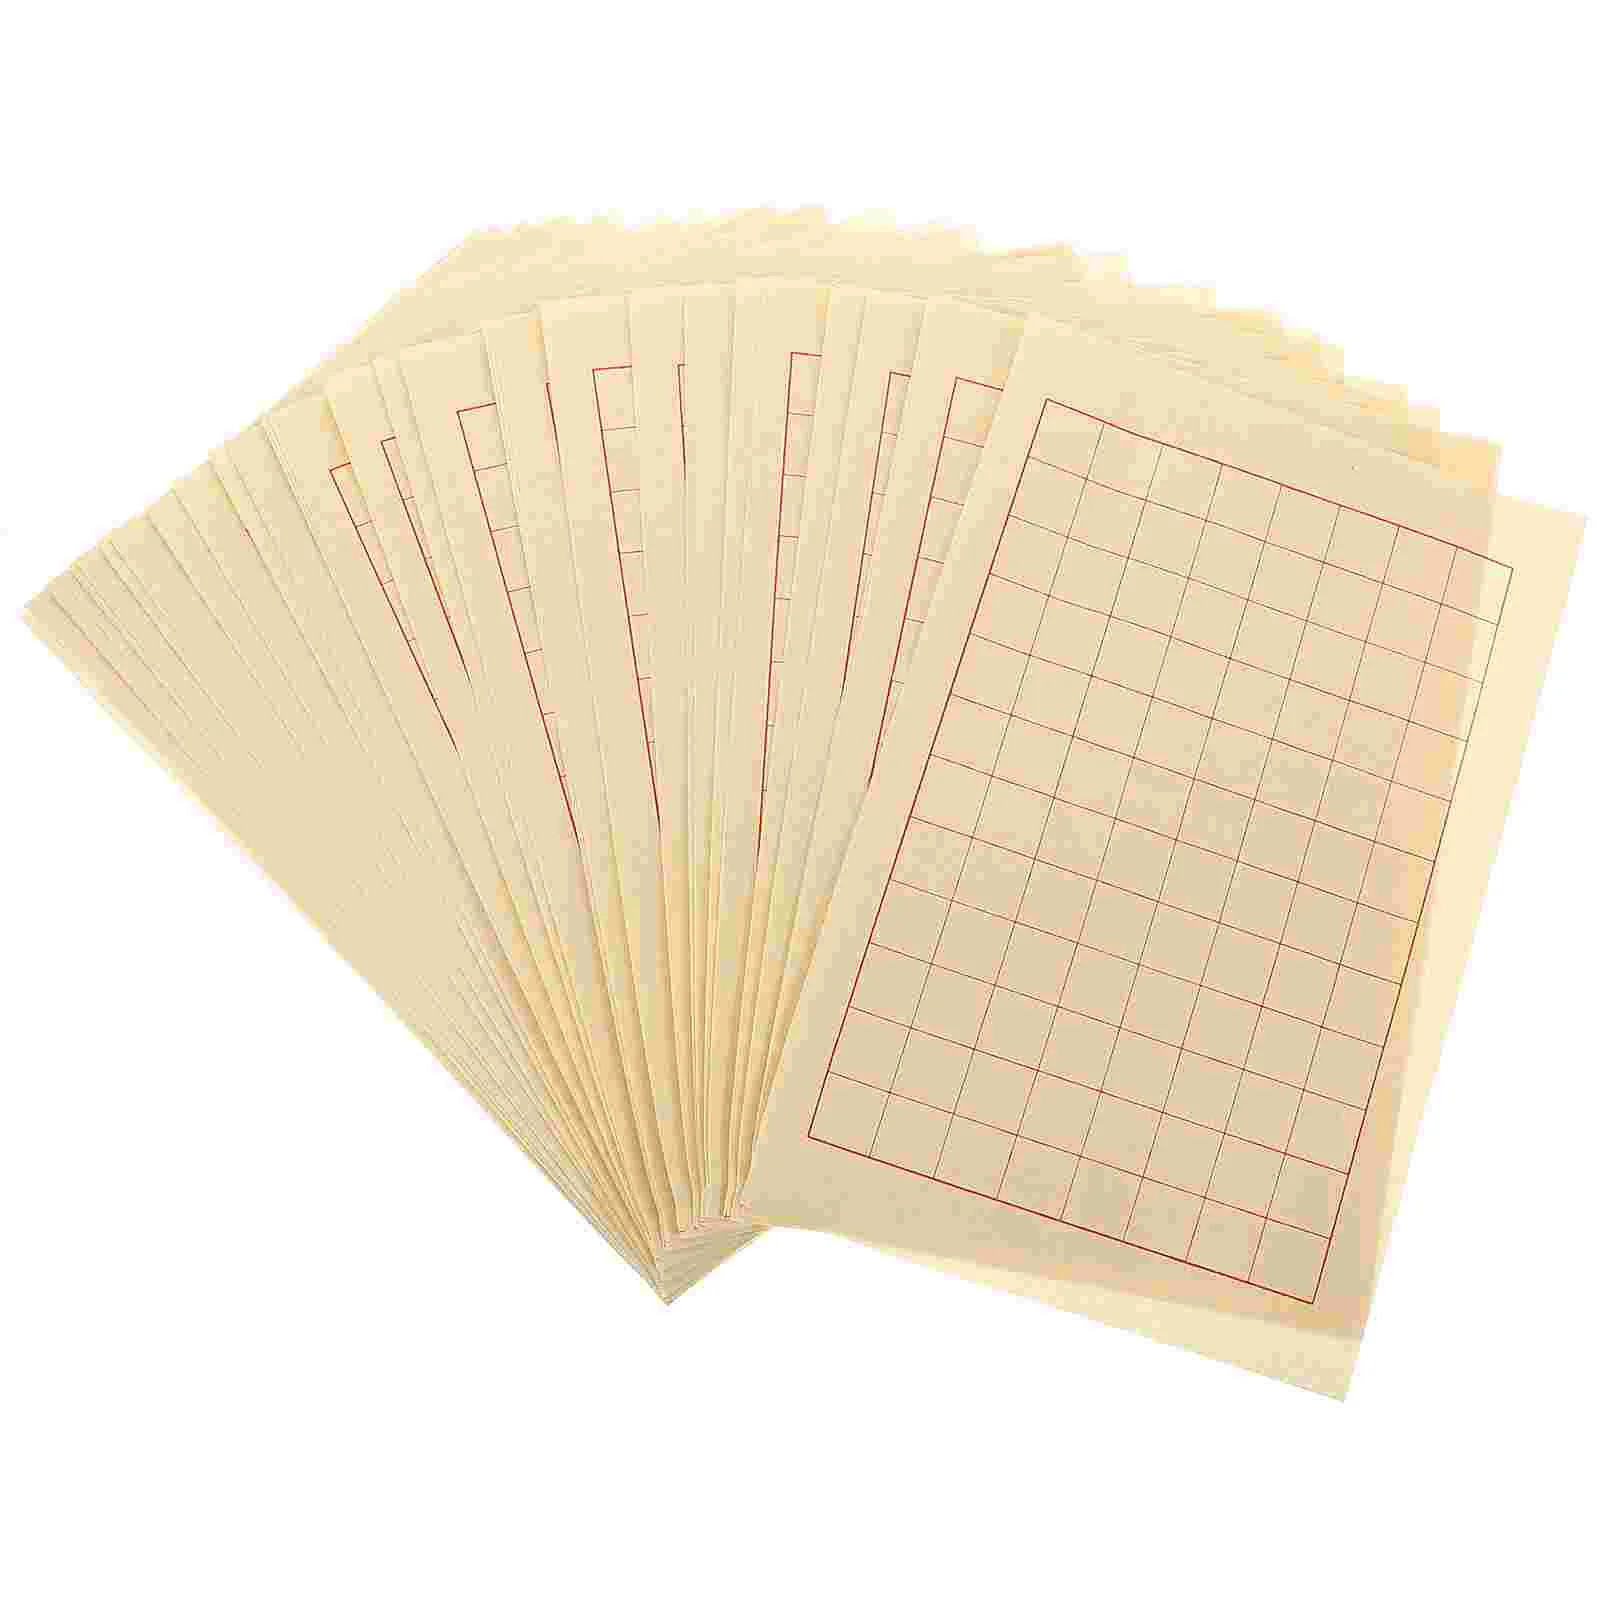 

40 Sheets of Rice Paper for Calligraphy Multi-use Xuan Paper Handwriting Paper Chinese Rice Paper